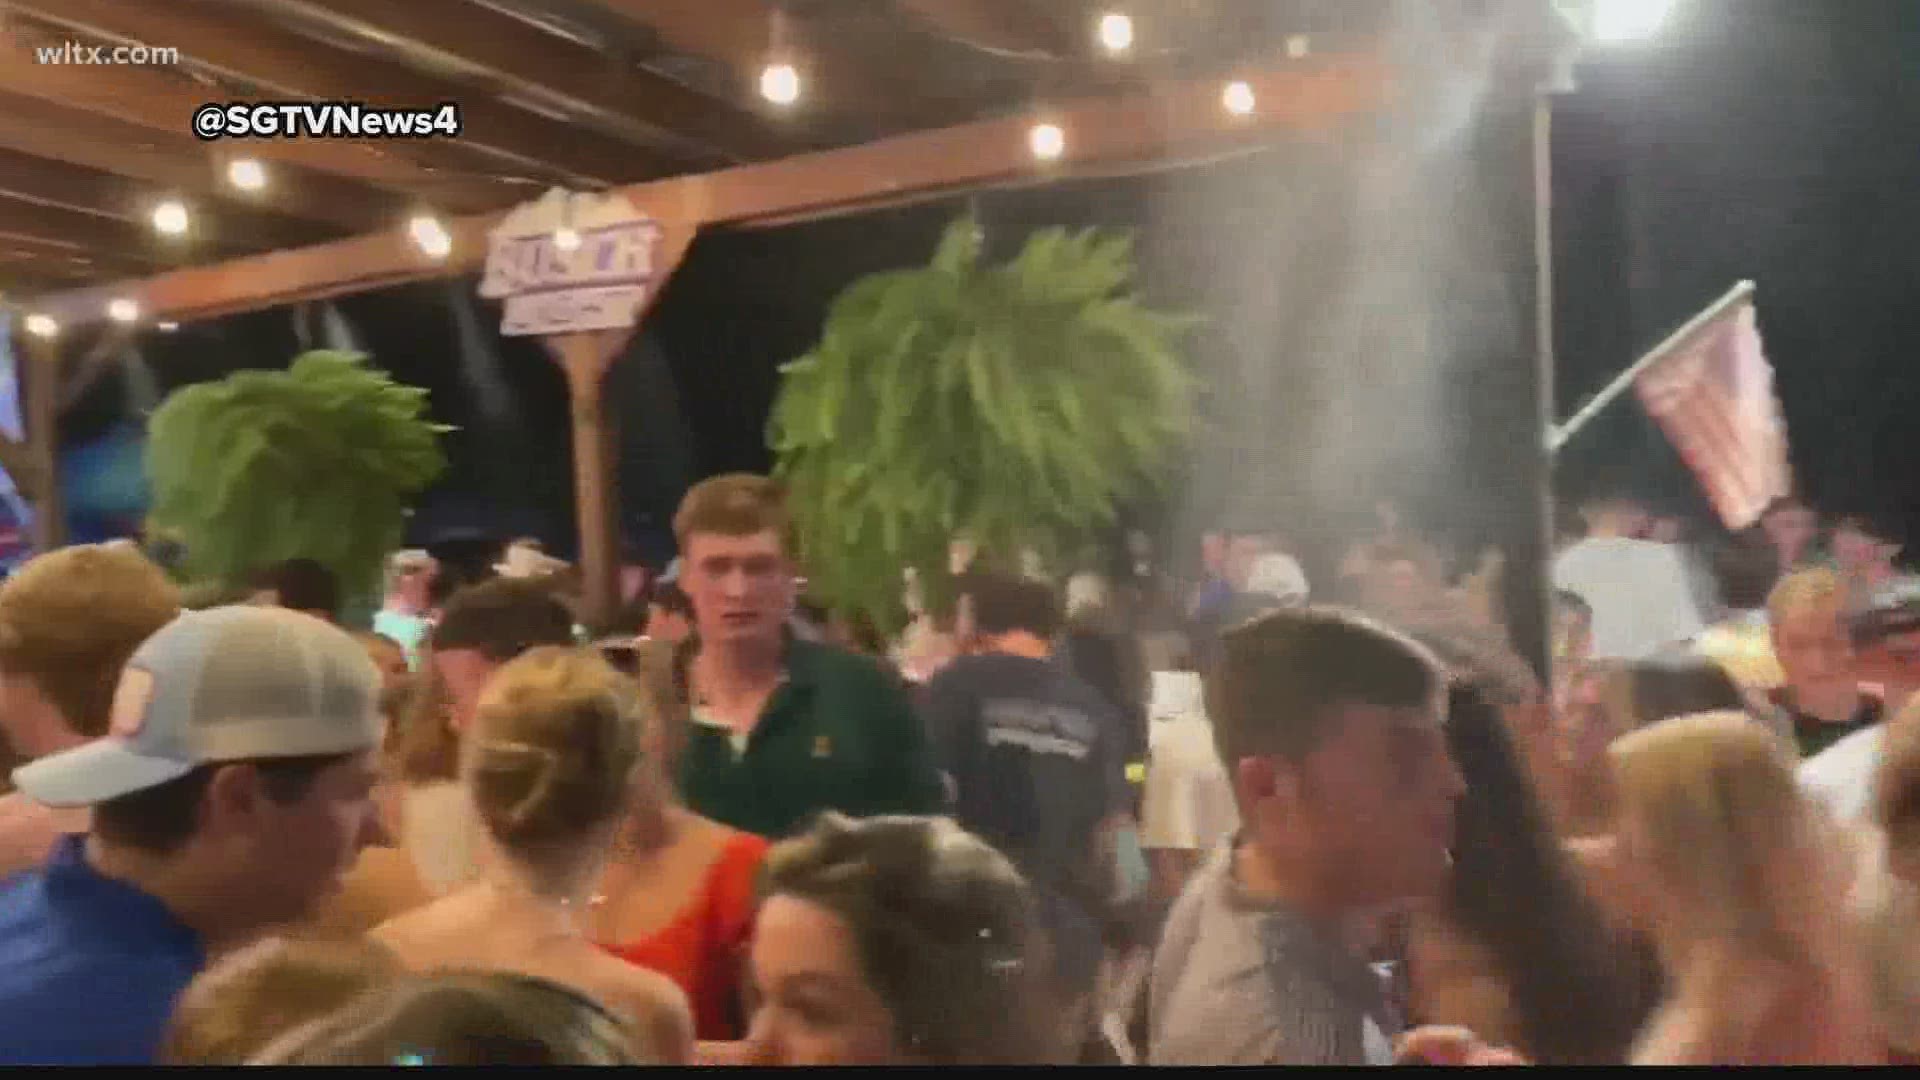 Videos of dozens of young people crowding at a Columbia bar are circulating on social media